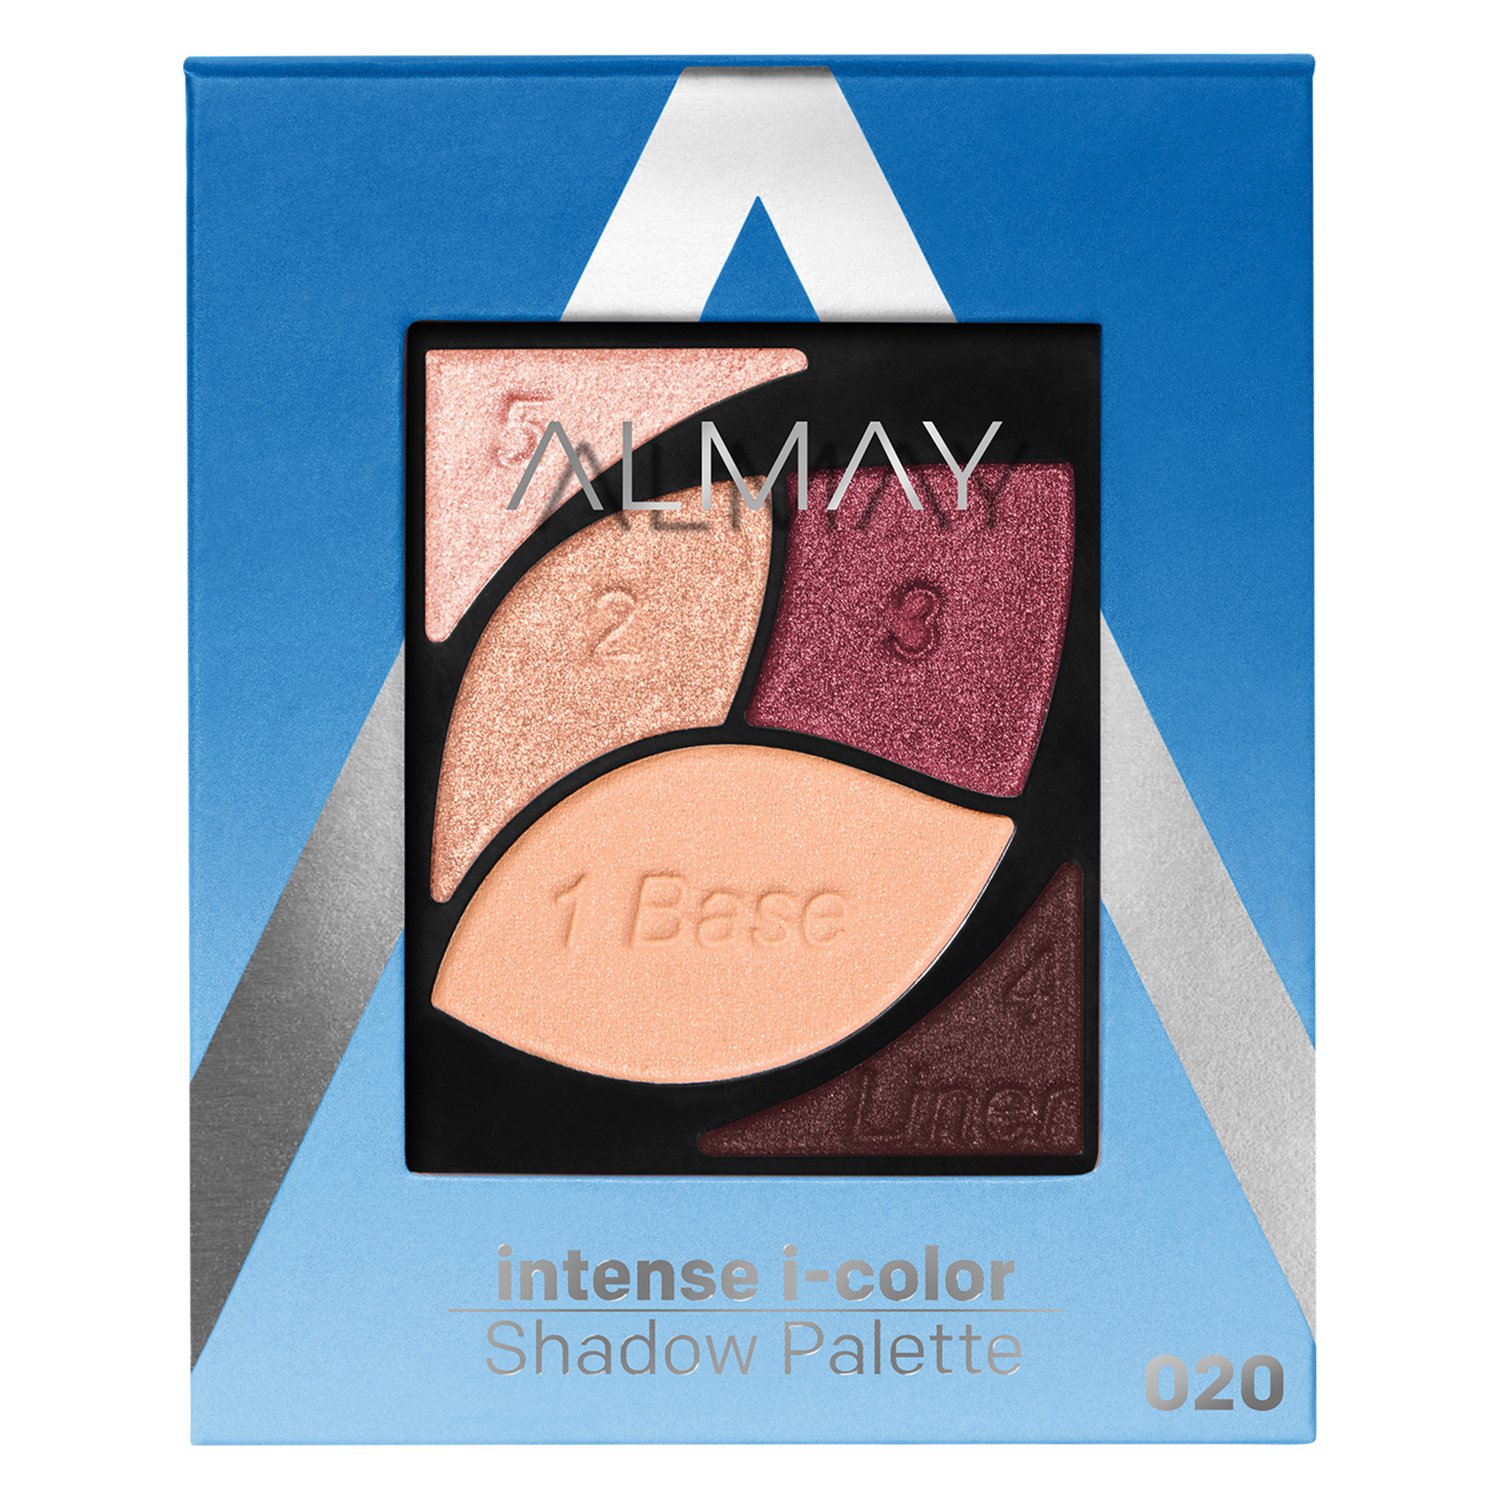 Almany Intense I-Color Shadow Pallette, Hypoallergenic, 020 Blue Eyes - image 1 of 14